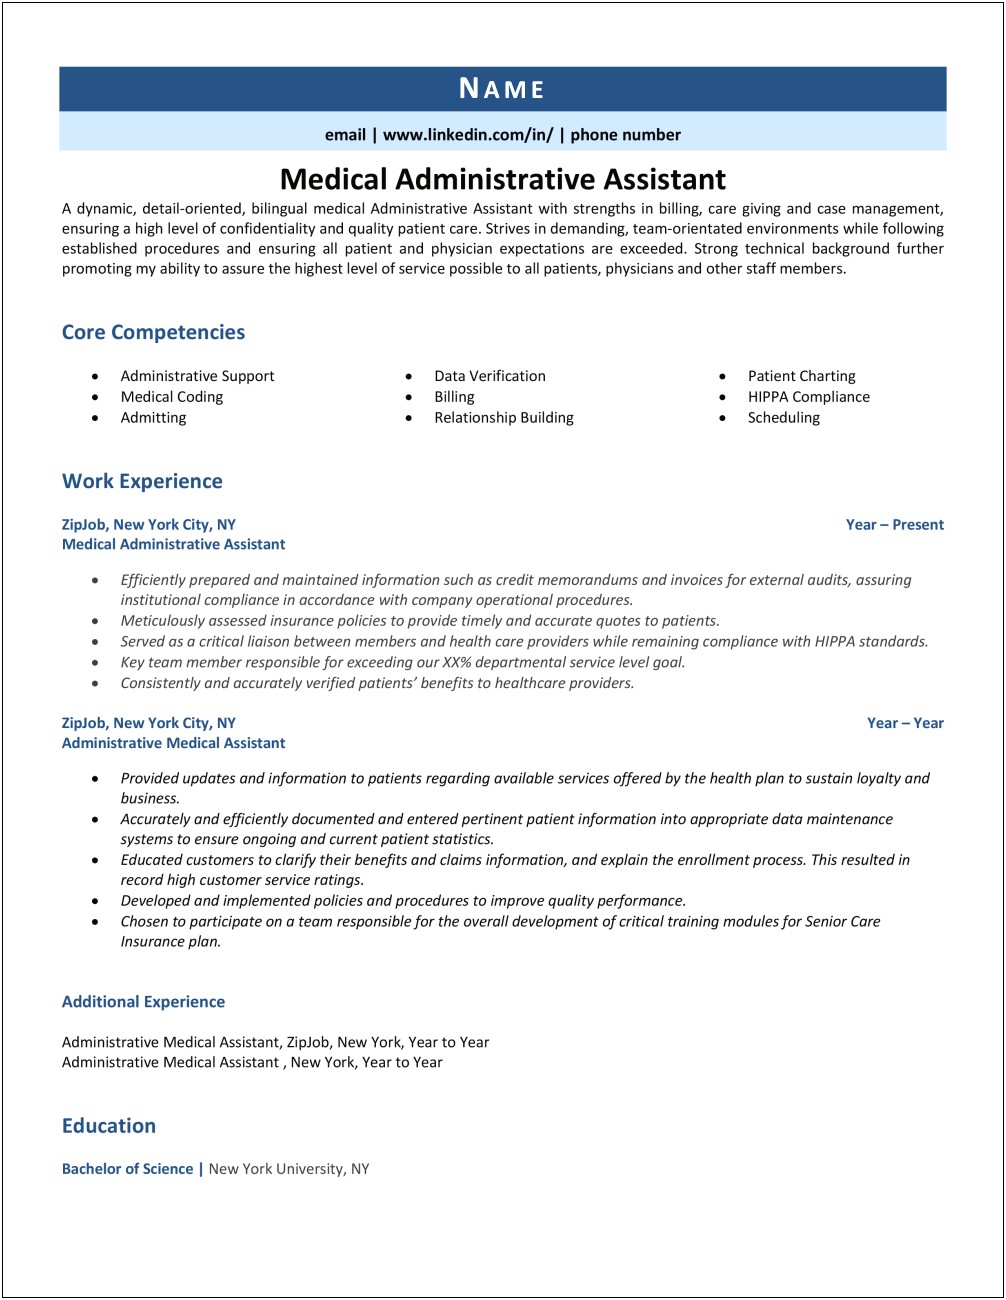 Certified Medical Administrative Assistant Resume Objective Sample